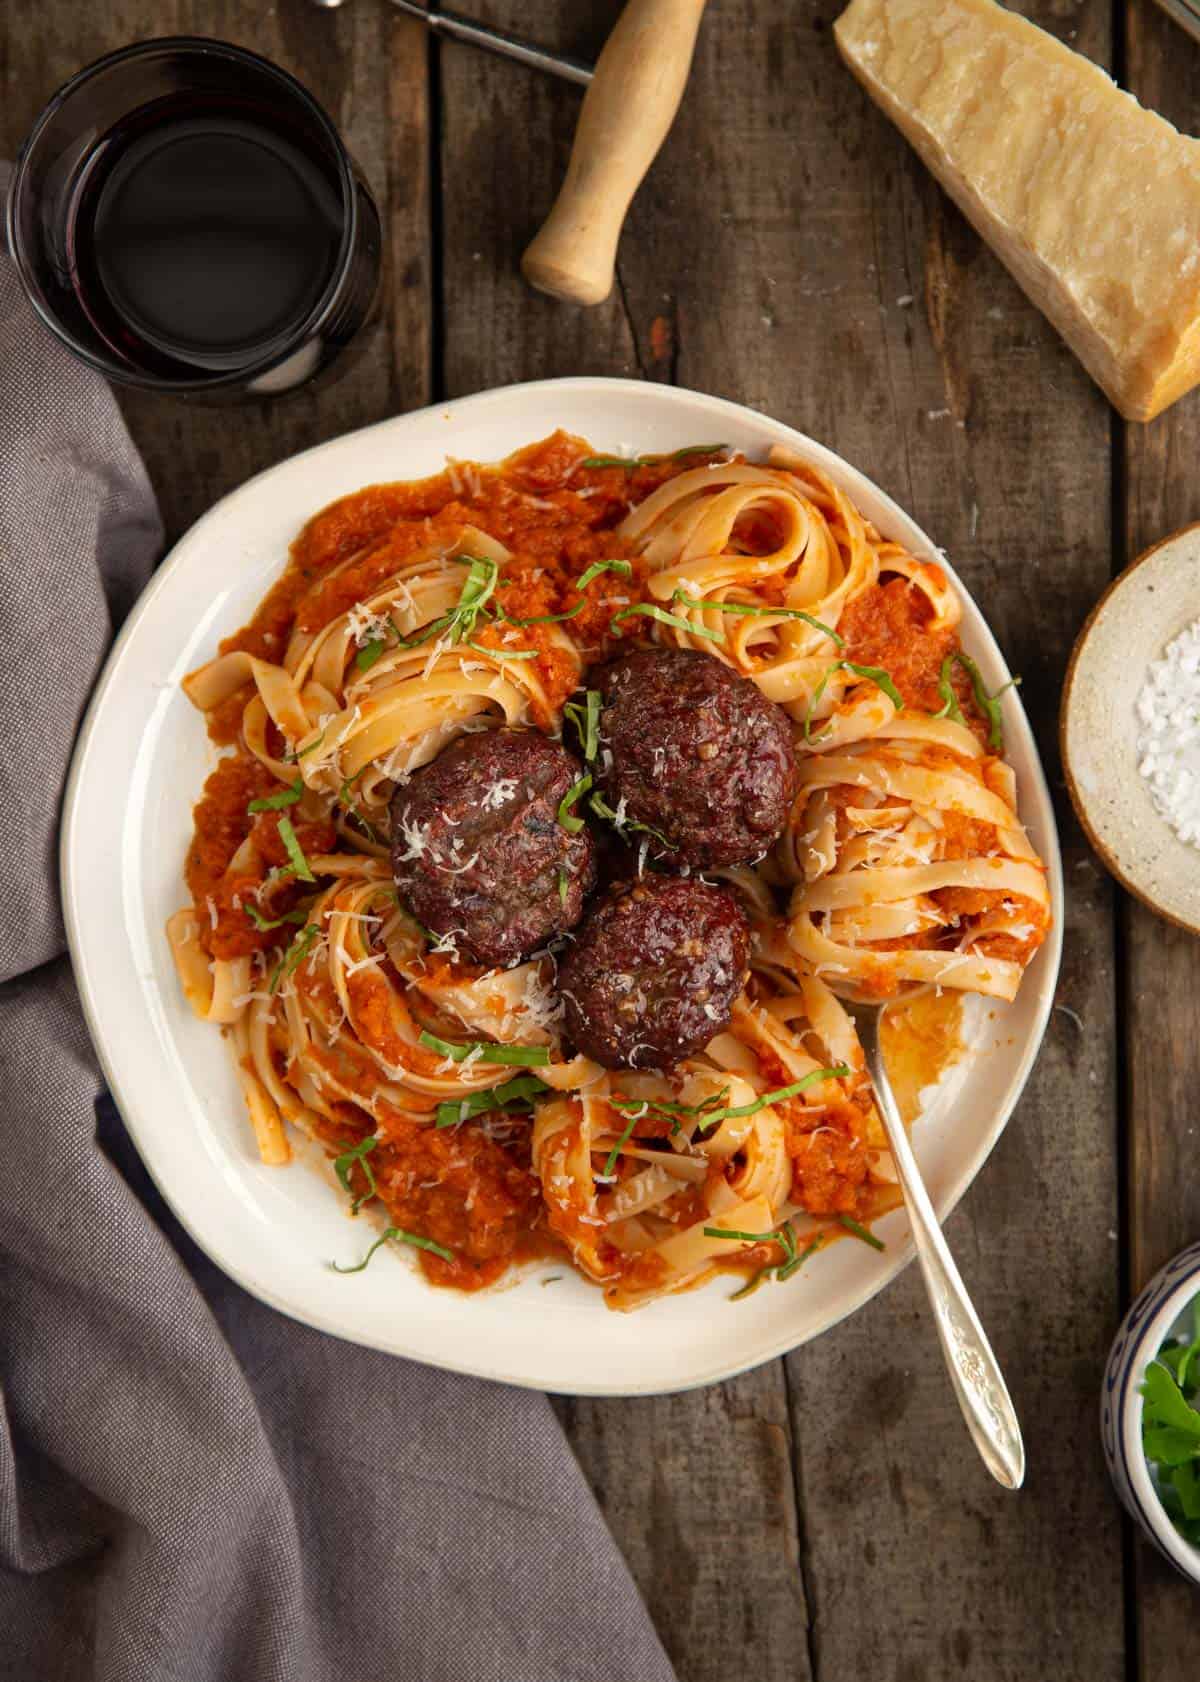 A plate with smoked tomato sauce, pasta, and meatballs